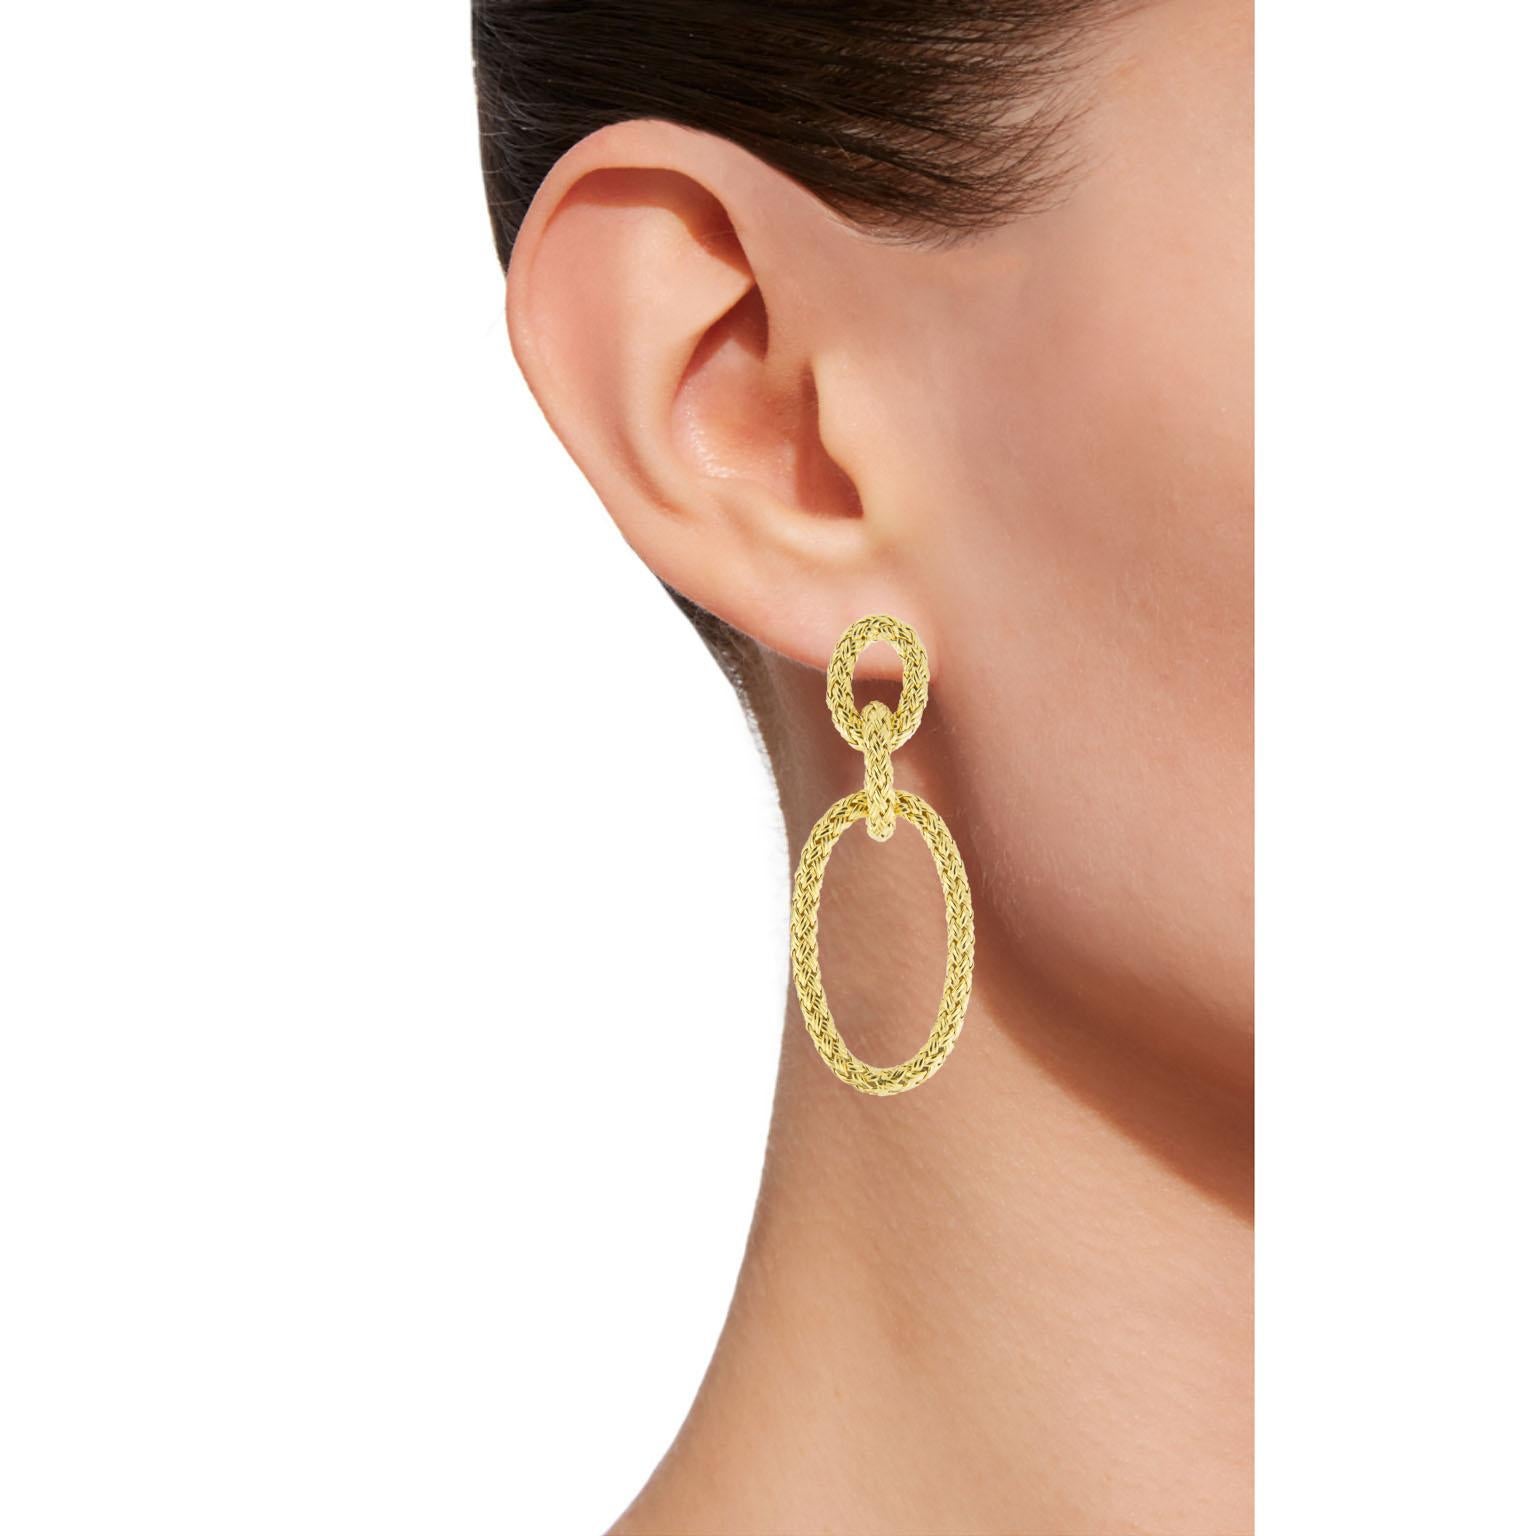 Alex Jona design collection, hand crafted in Italy, gold-plated sterling silver basket weave ear pendants. 
Dimensions: H 2.04 in / 5.20 cm X W 0.78 in / 19.86 mm X D 0.11 in / 2.98 mm
Weight: 8.7 g
Alex Jona jewels stand out, not only for their